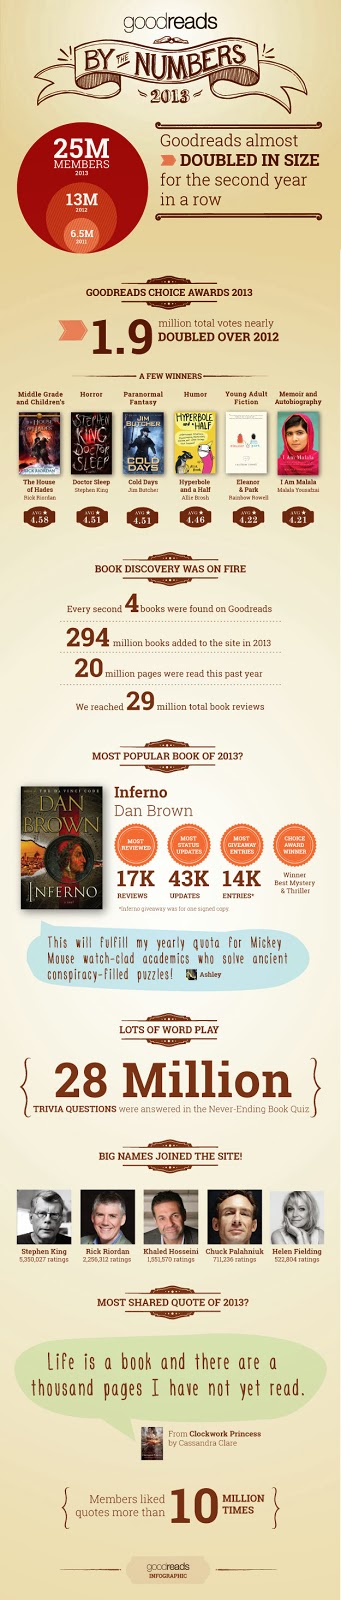 https://www.goodreads.com/blog/show/449-goodreads-2013-by-the-numbers-an-infographic